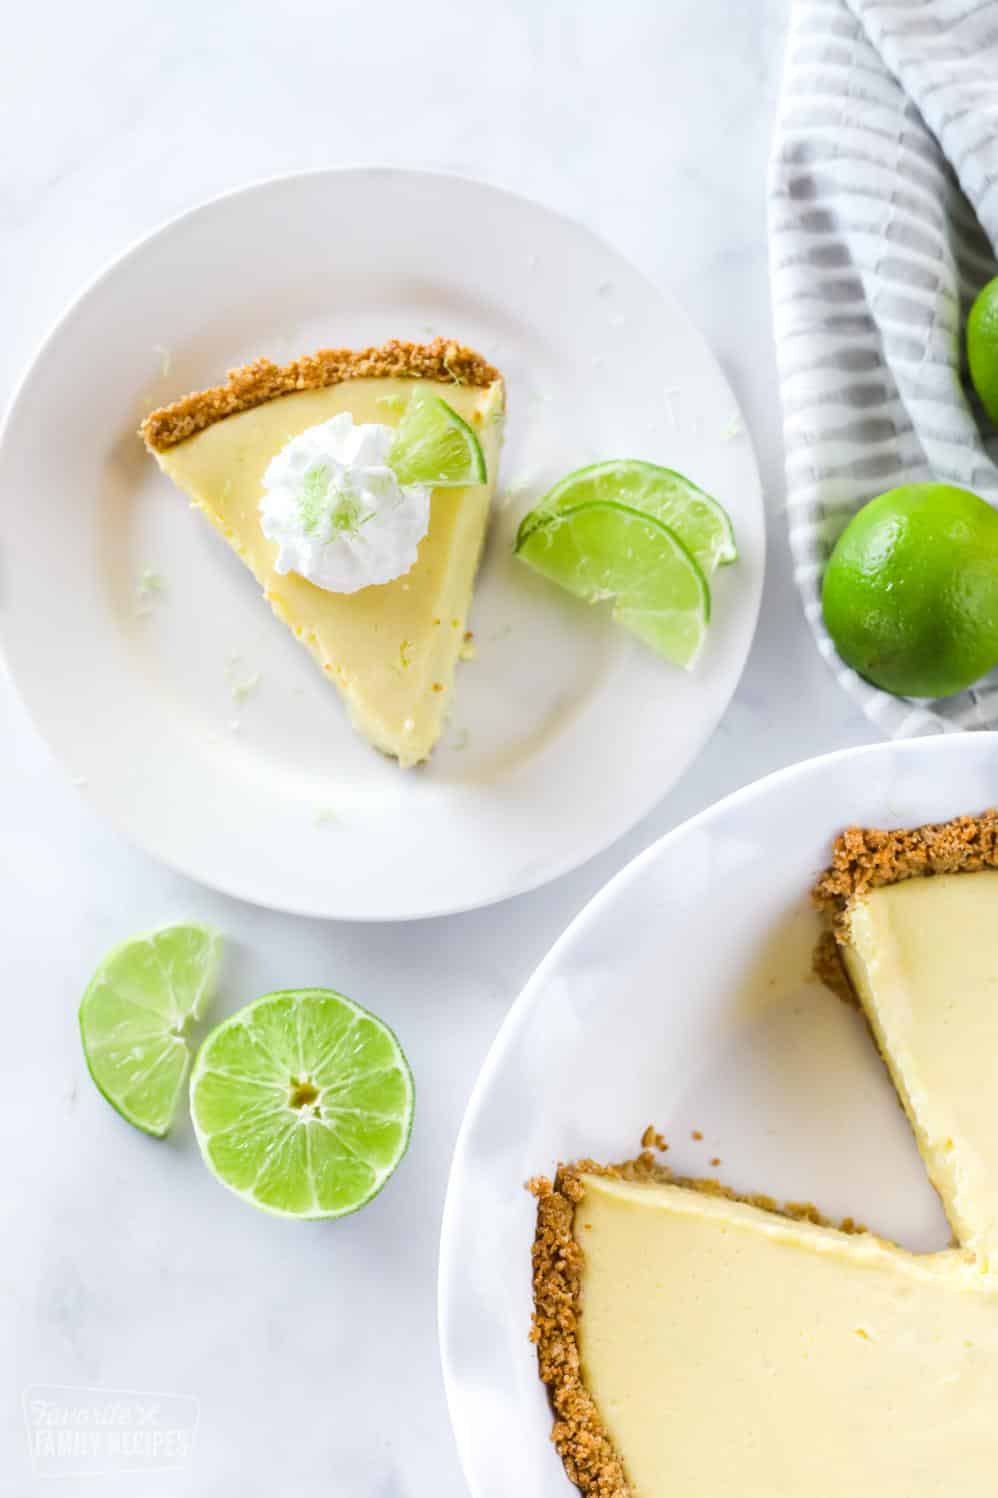  The finished product - a tantalizingly tangy key lime pie